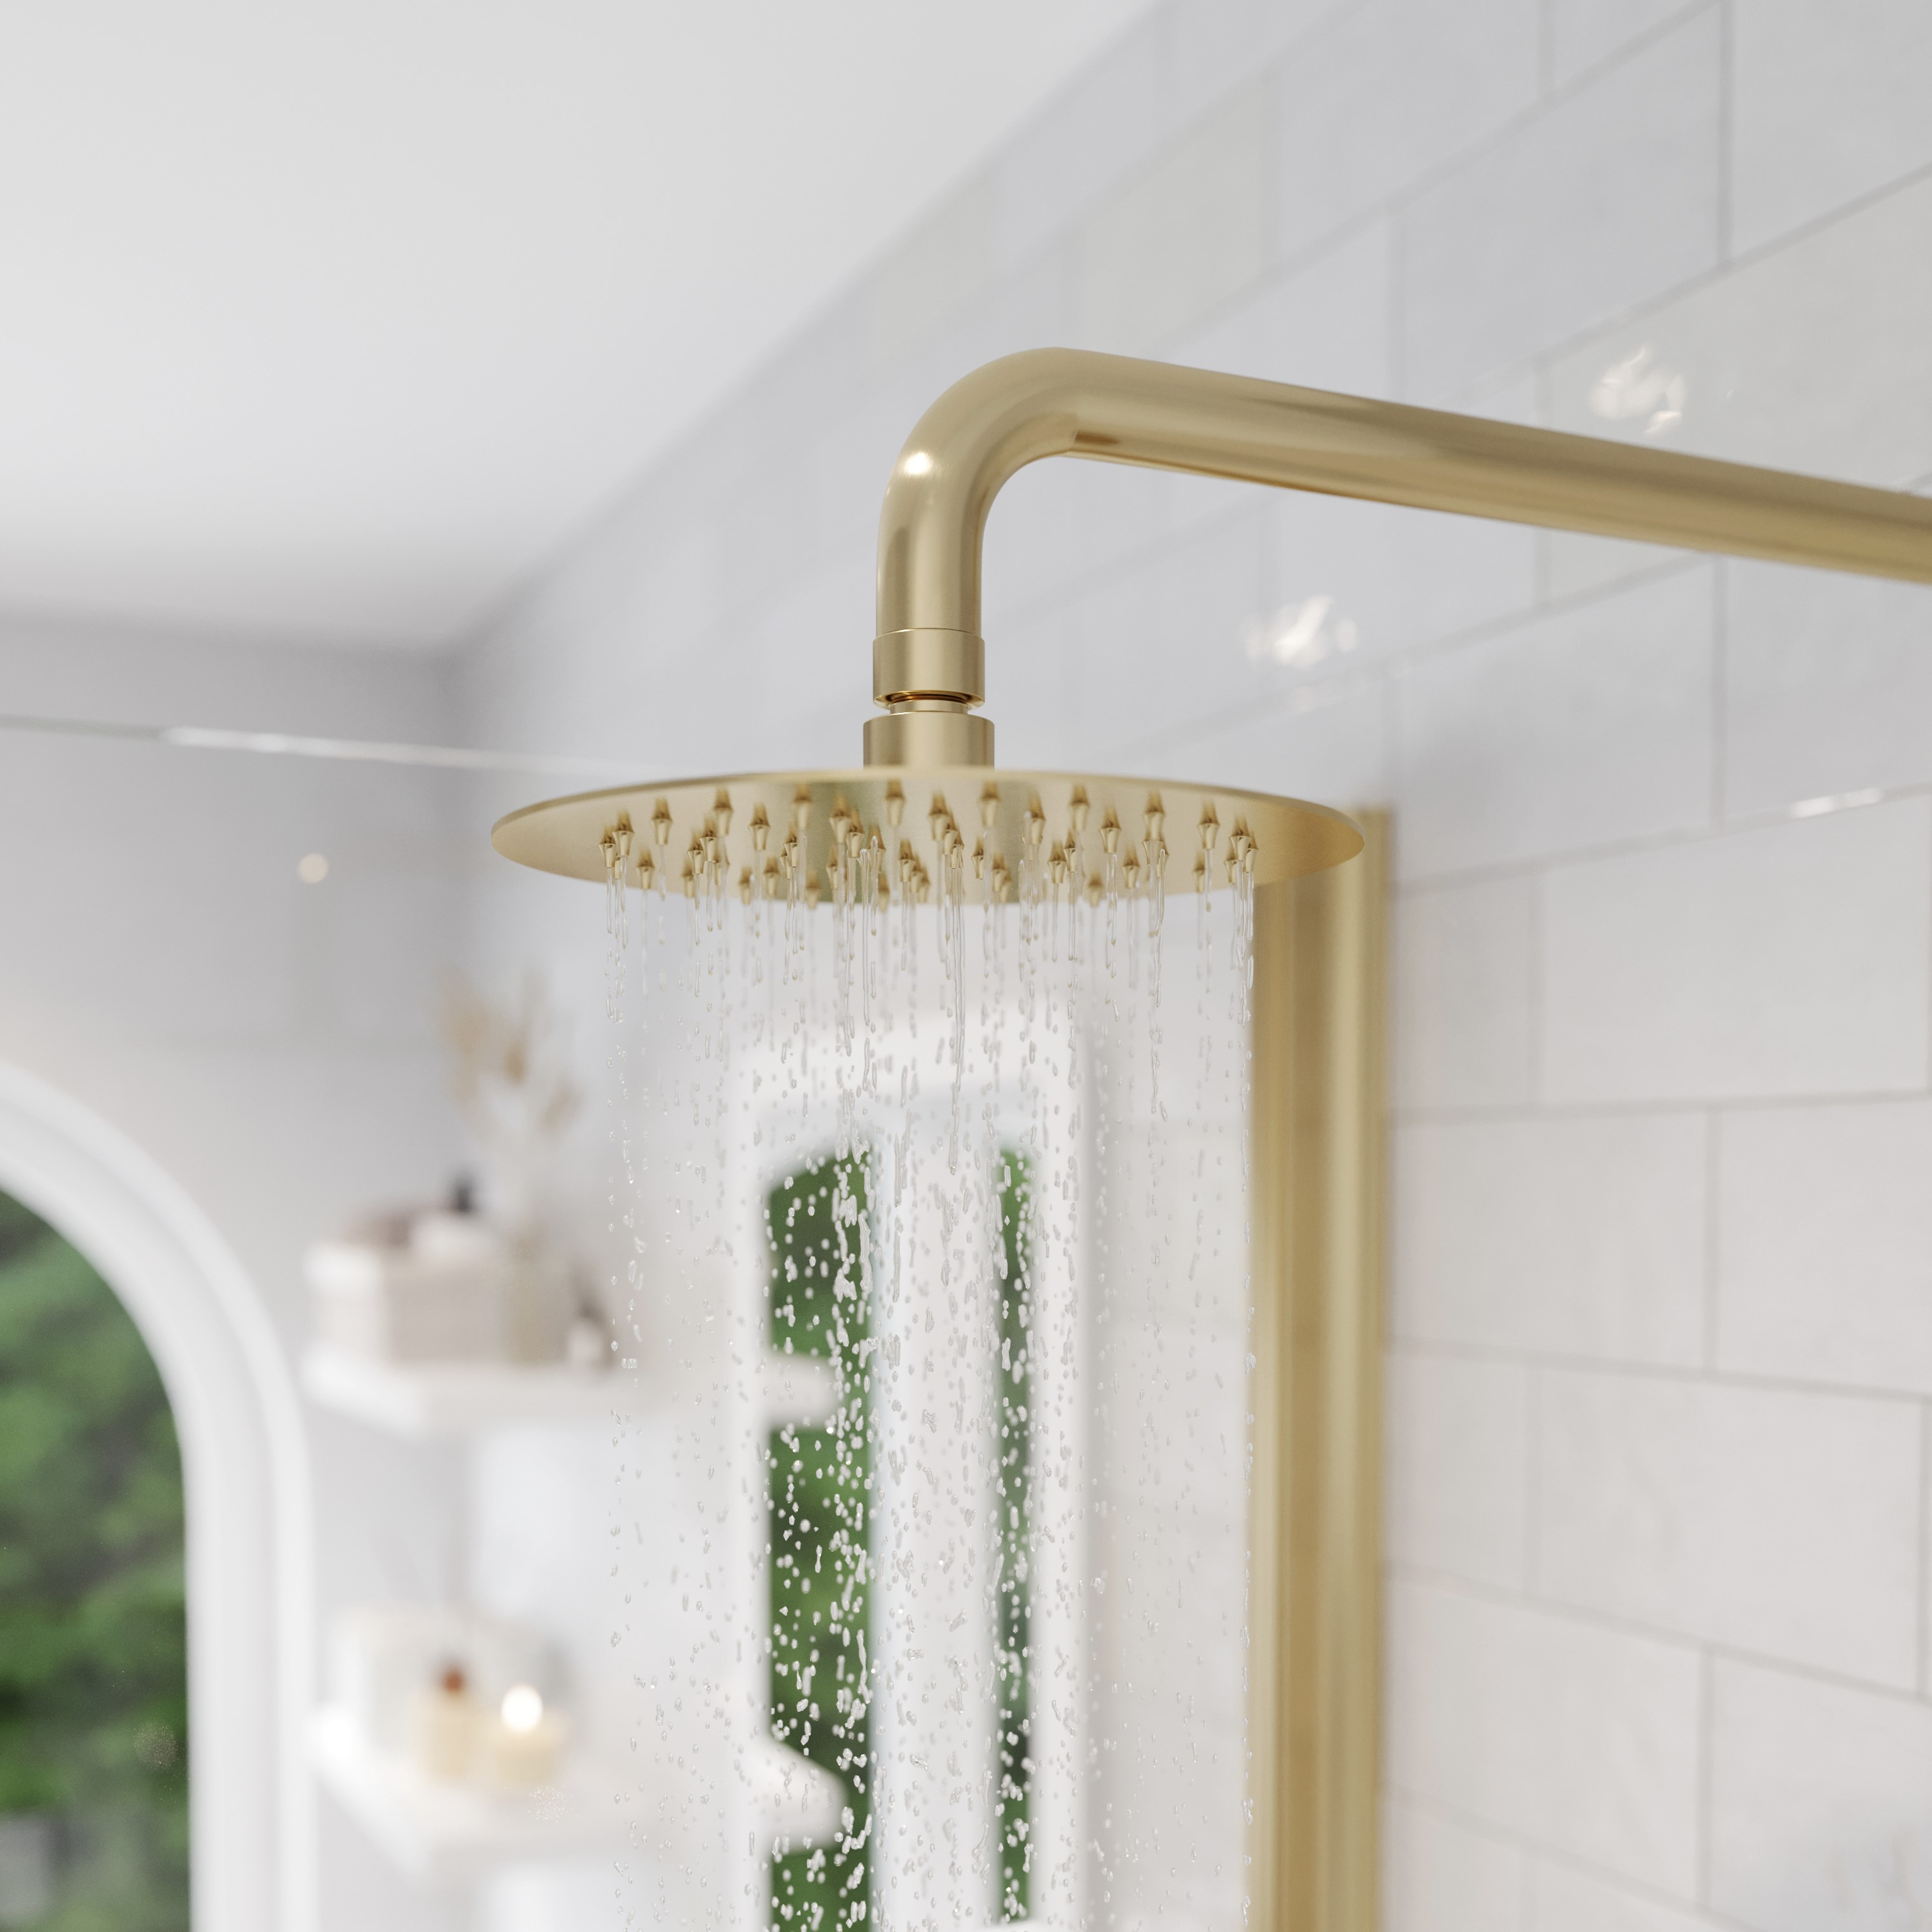 Saneux Cos shower head and arm in brushed brass